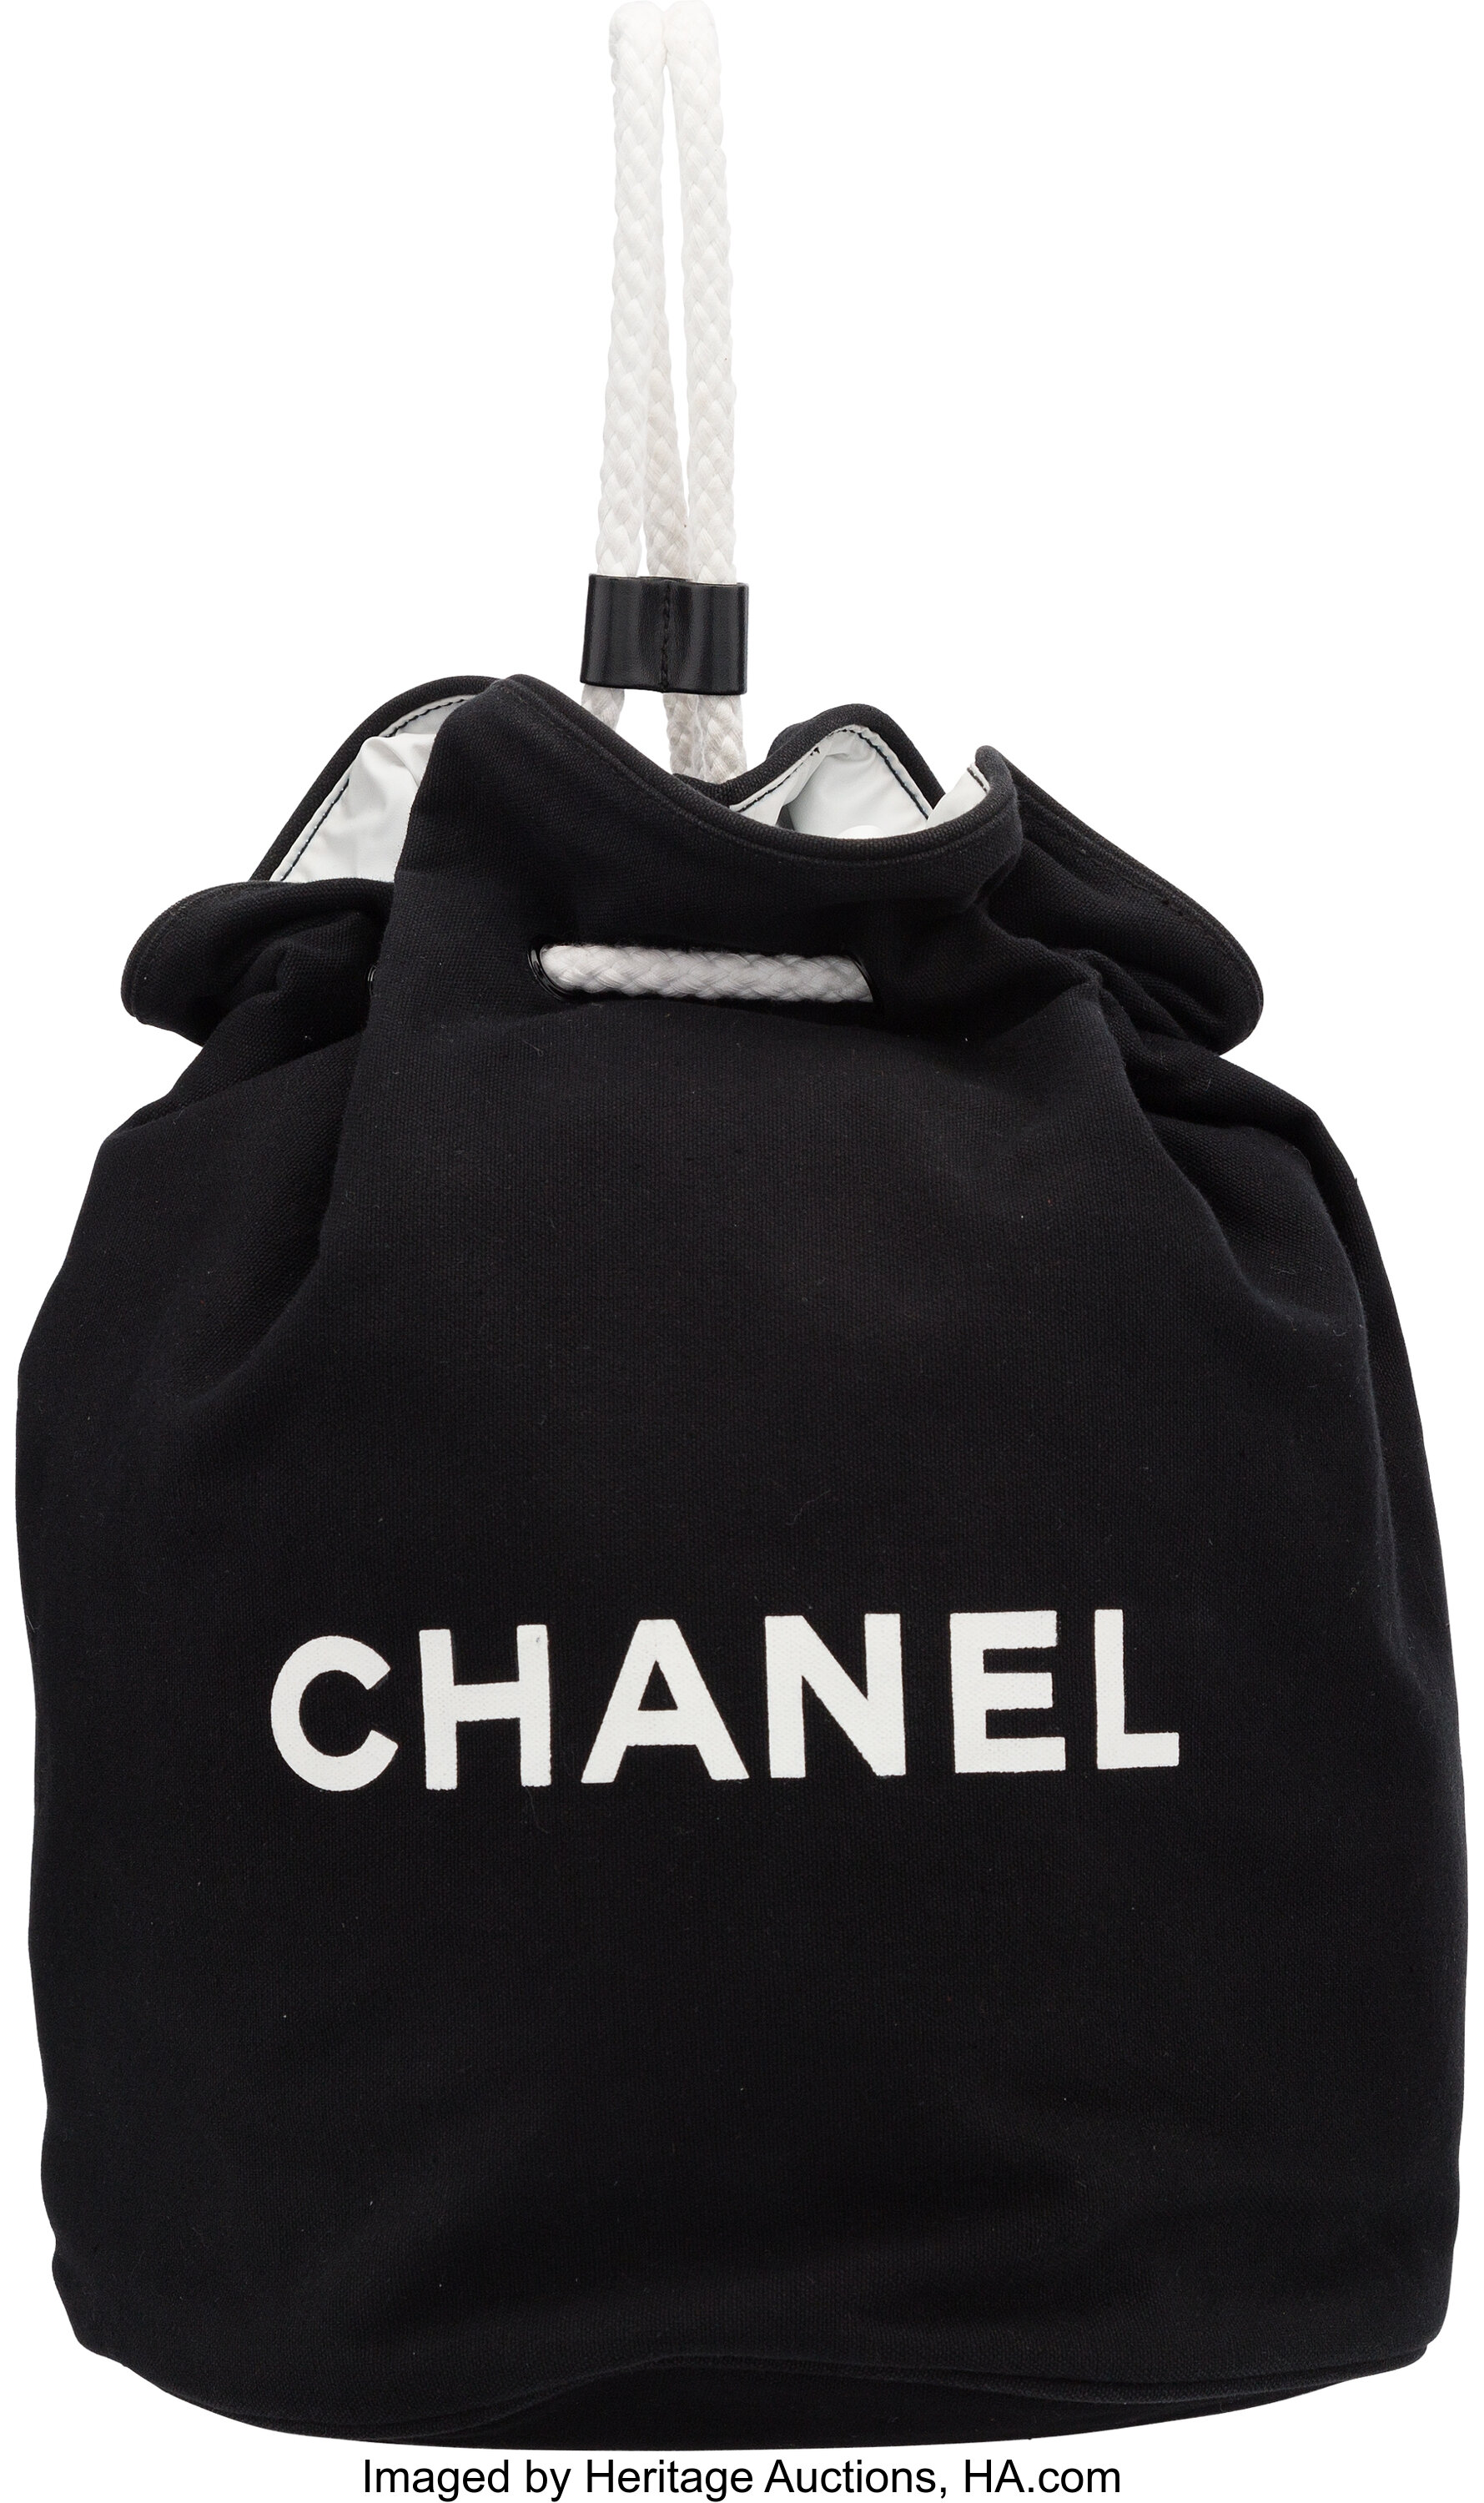 Chanel Black Canvas Drawstring Backpack. Excellent Condition. 11, Lot  #58537